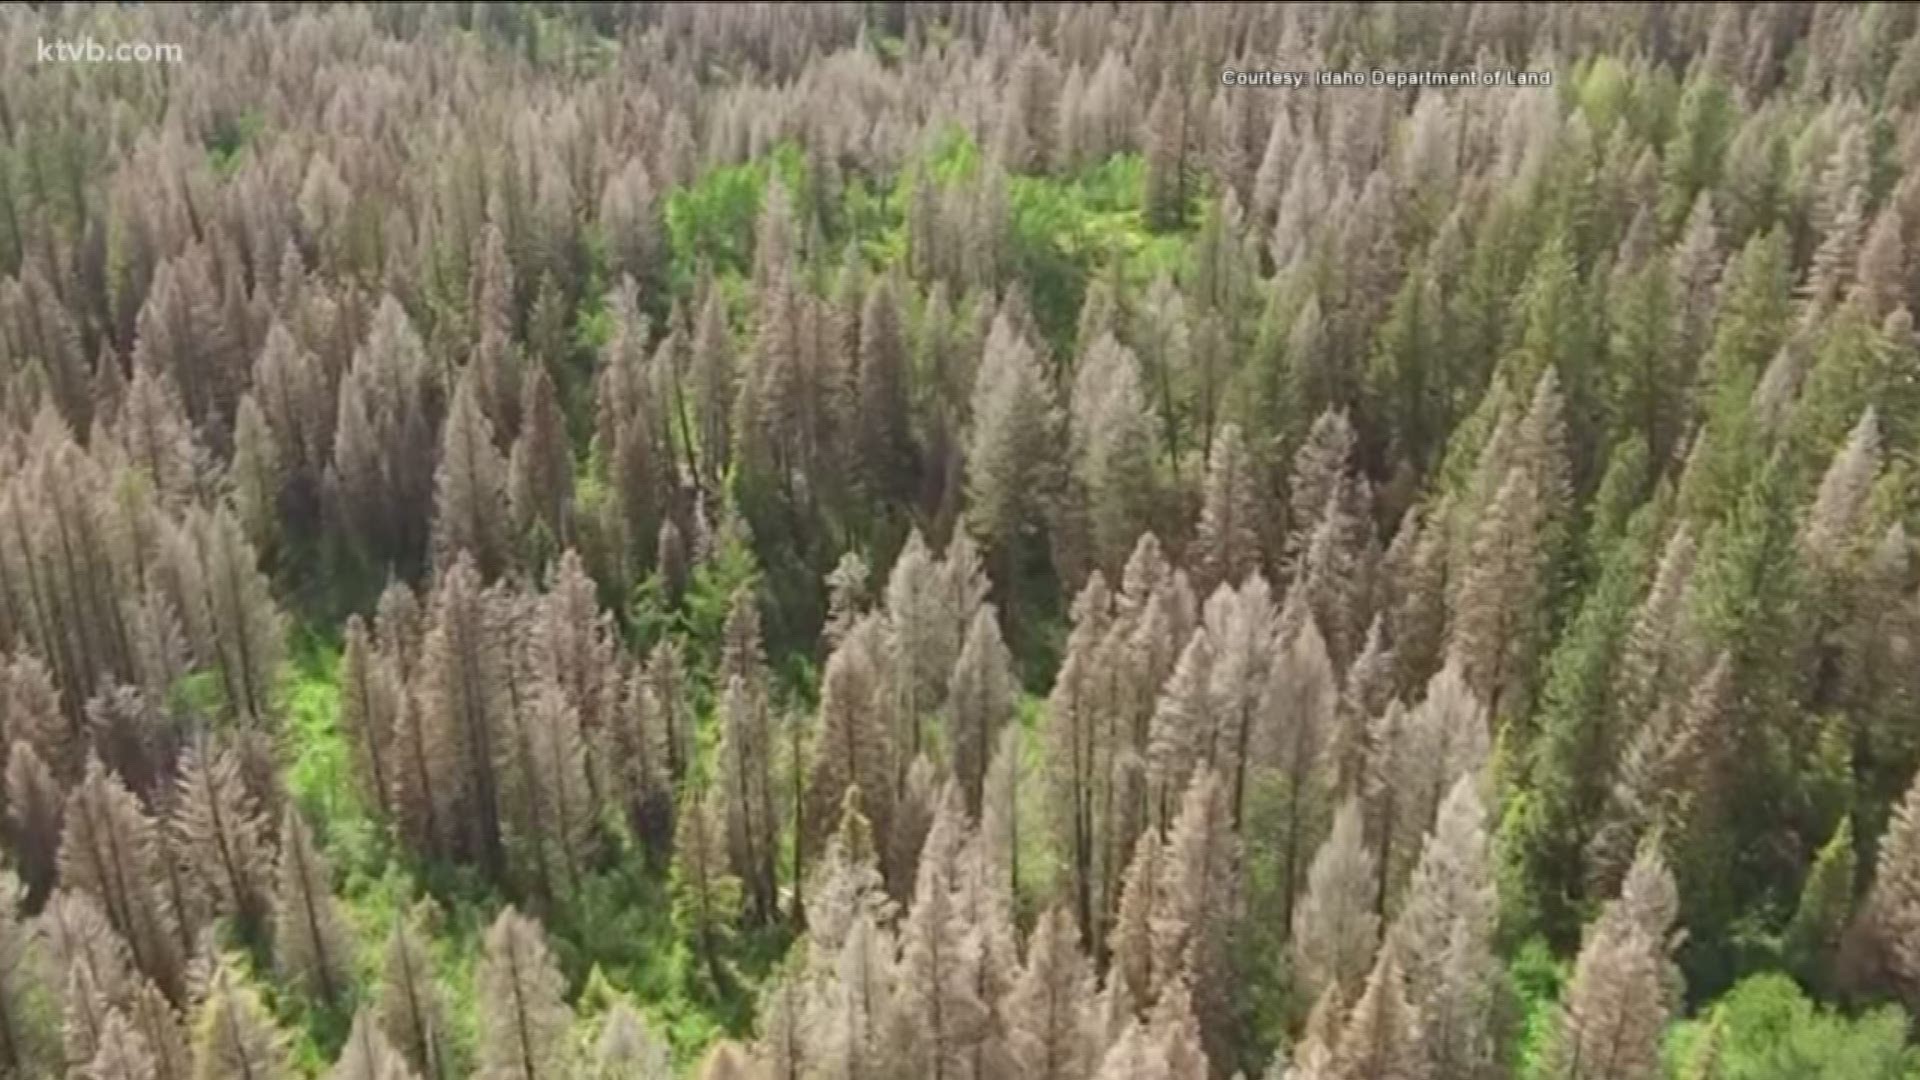 Nearly 1,000 acres of trees have died in central Idaho.